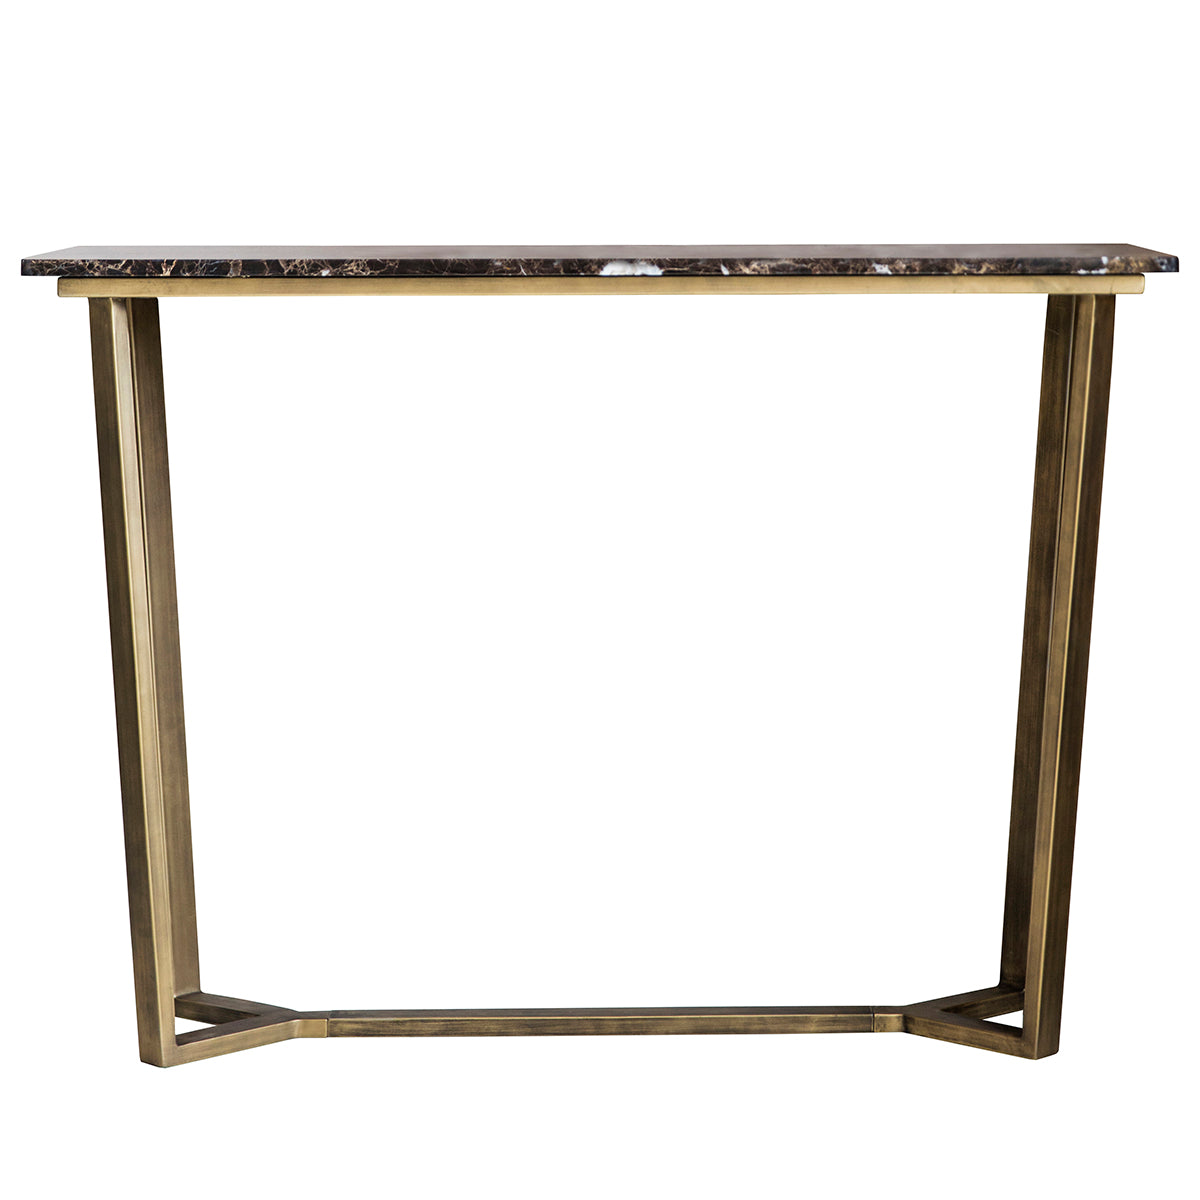 Load image into Gallery viewer, A Moreleigh Console Table Marble 1100x400x800mm from Kikiathome.co.uk with a gold frame and marble top, perfect for elegant interior decor.
